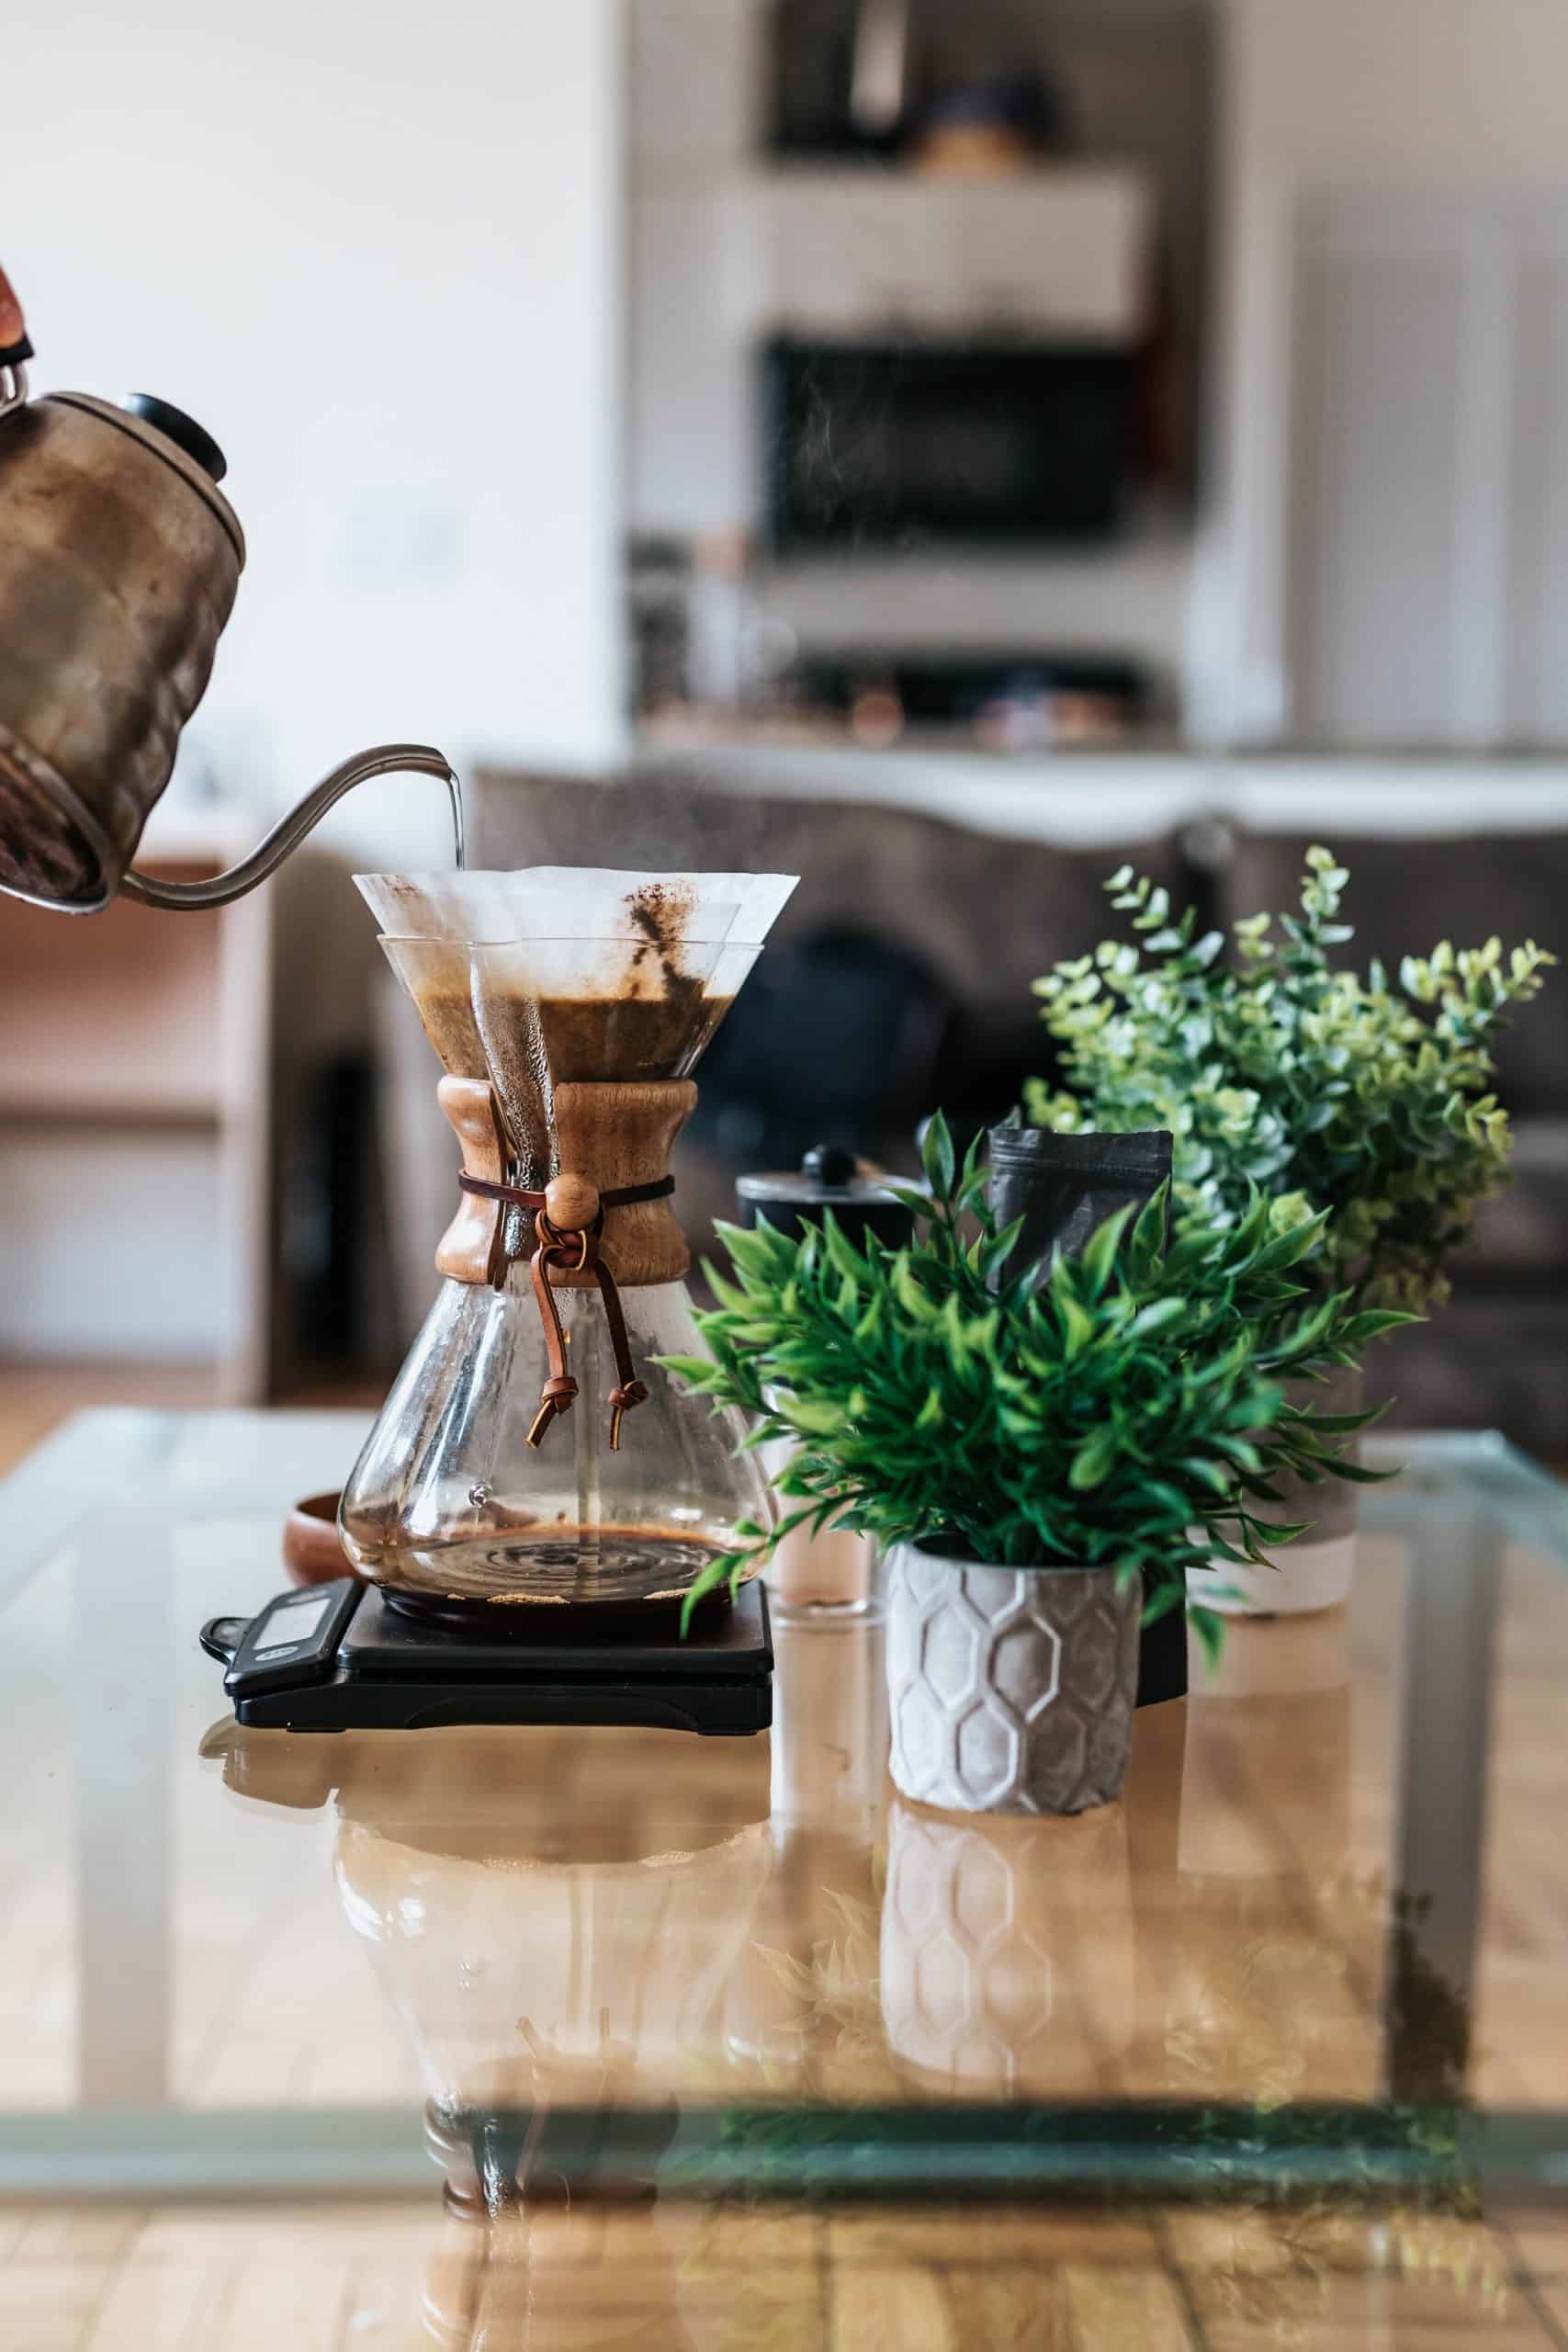 Coffee being poured through a carafe.